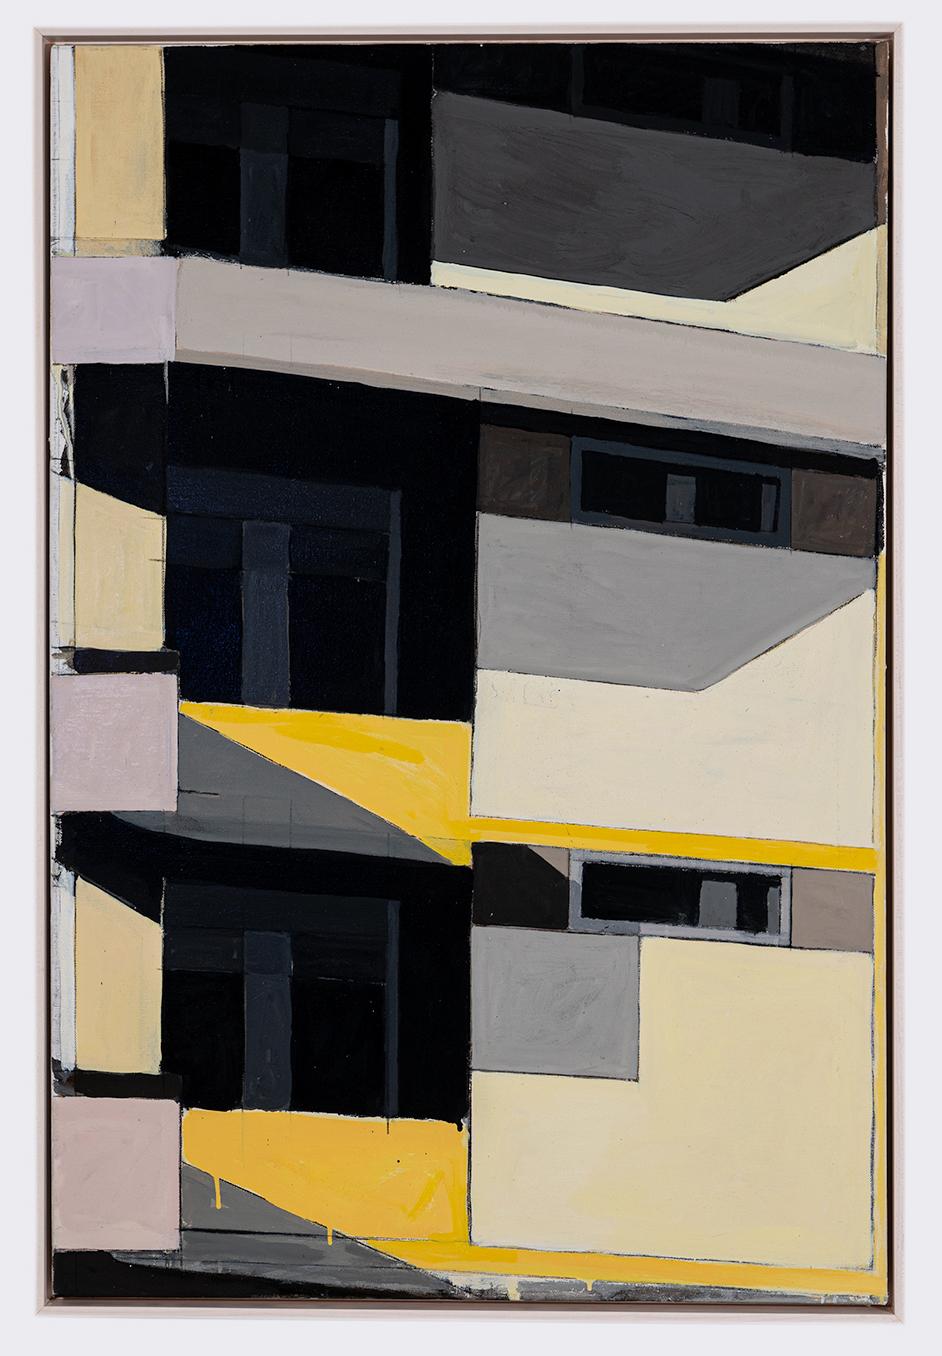 Ospedale II (Abstract Mid Century Modernity, Building Facade in Black & Yellow) - Painting de Anthony Finta